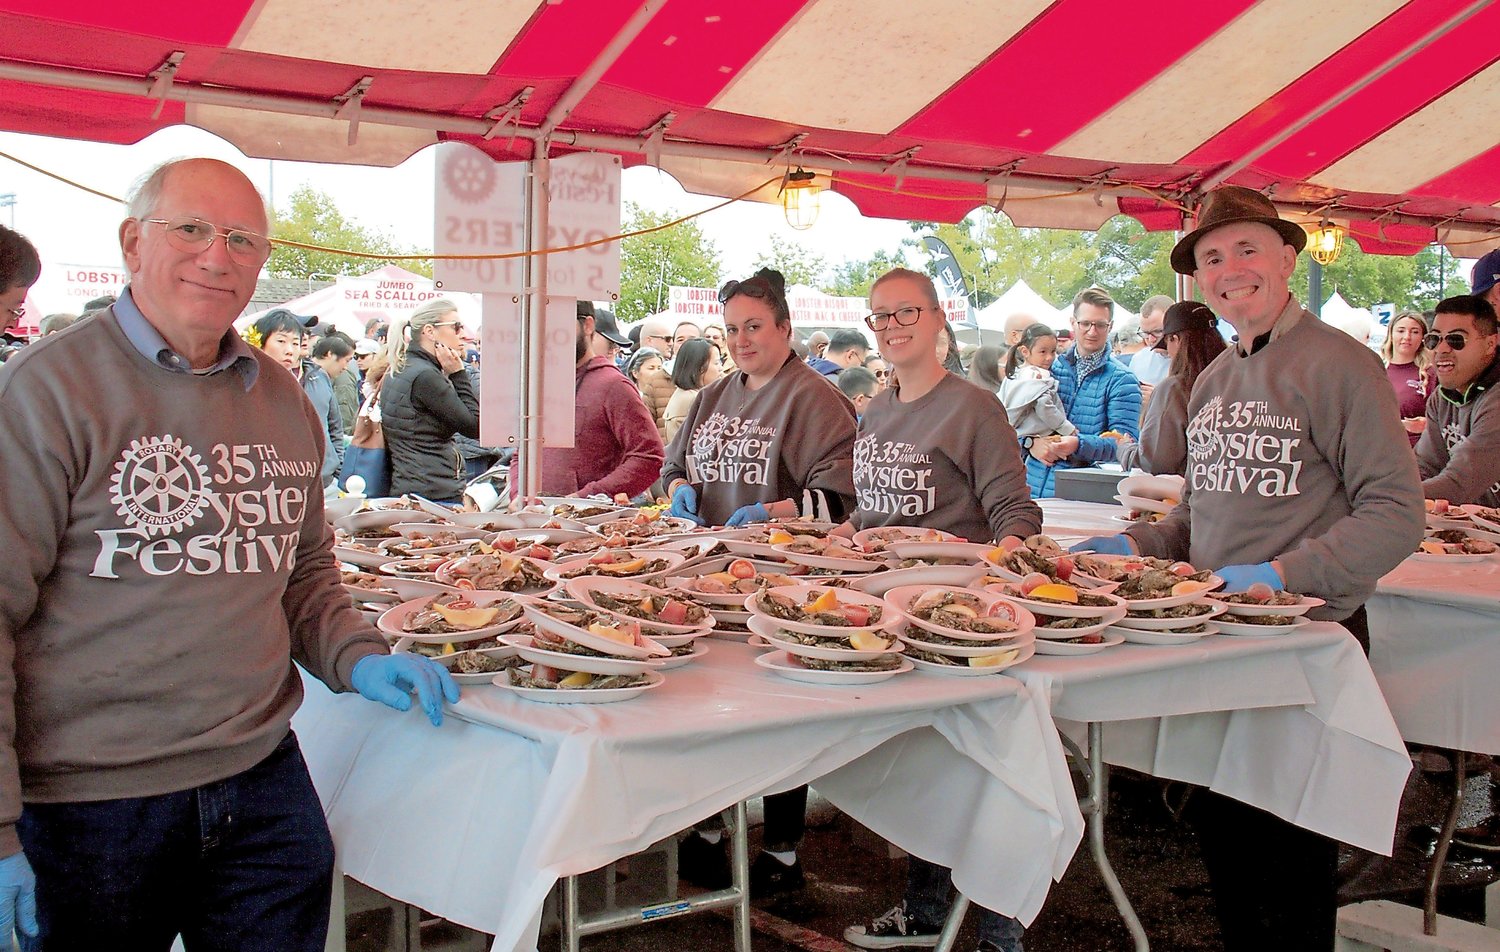 Oyster Festival returns in person after two years to the hamlet